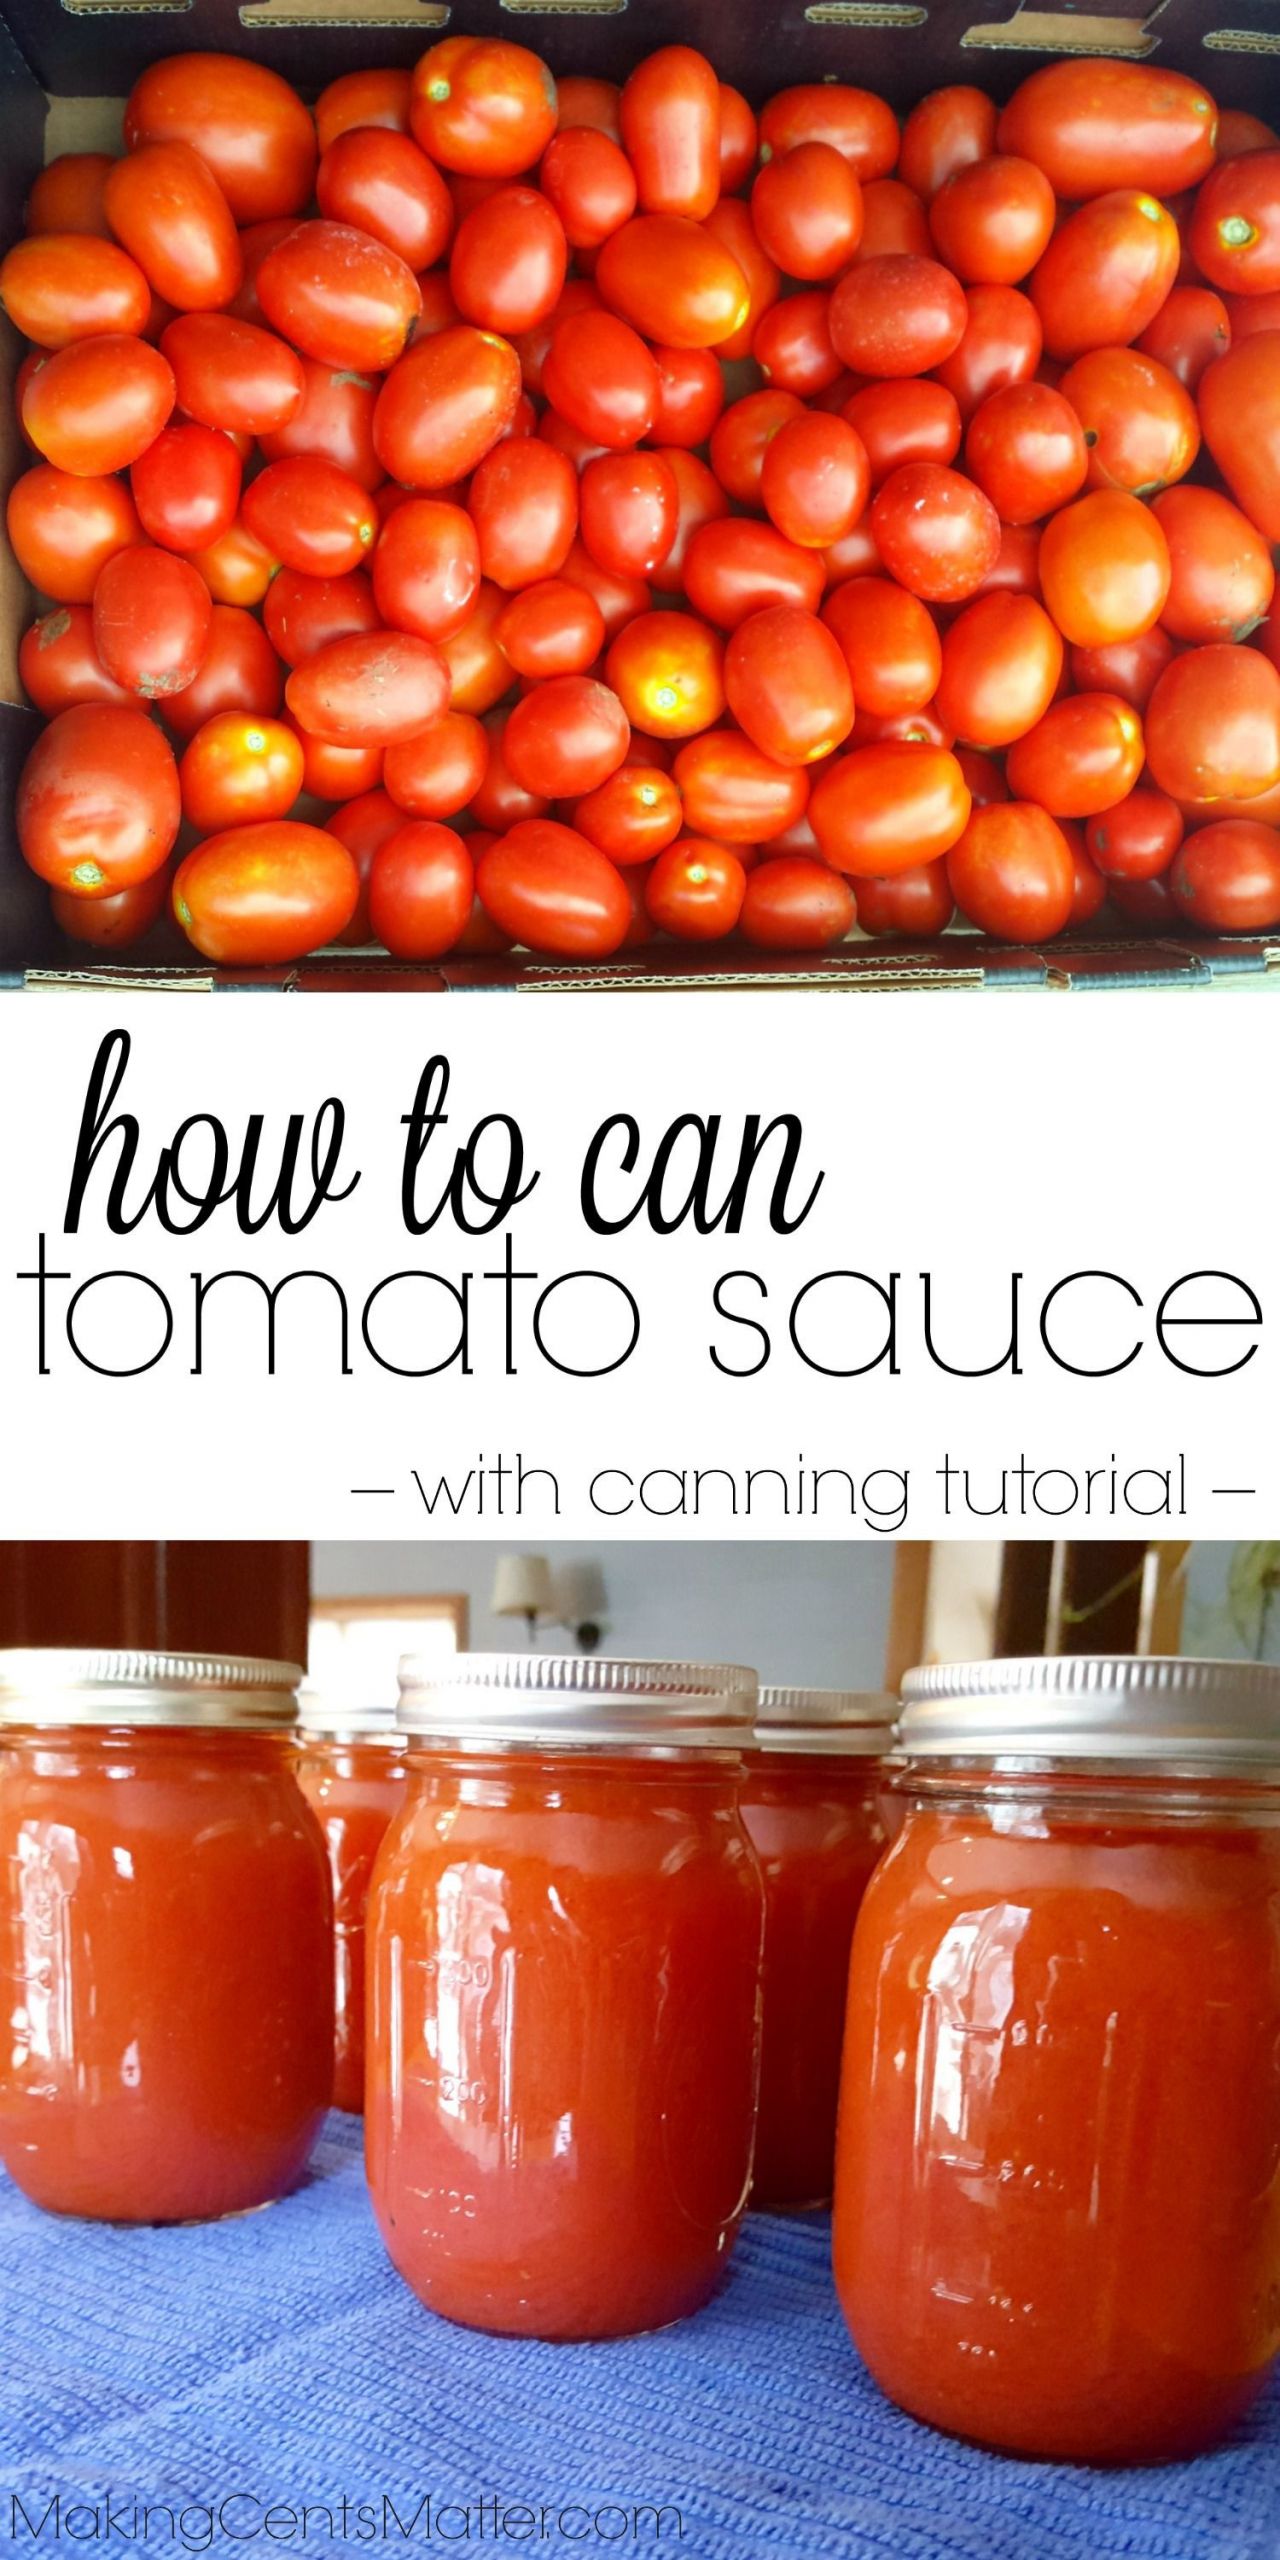 Pressure Canning Tomato Sauce
 How To Can Tomato Sauce